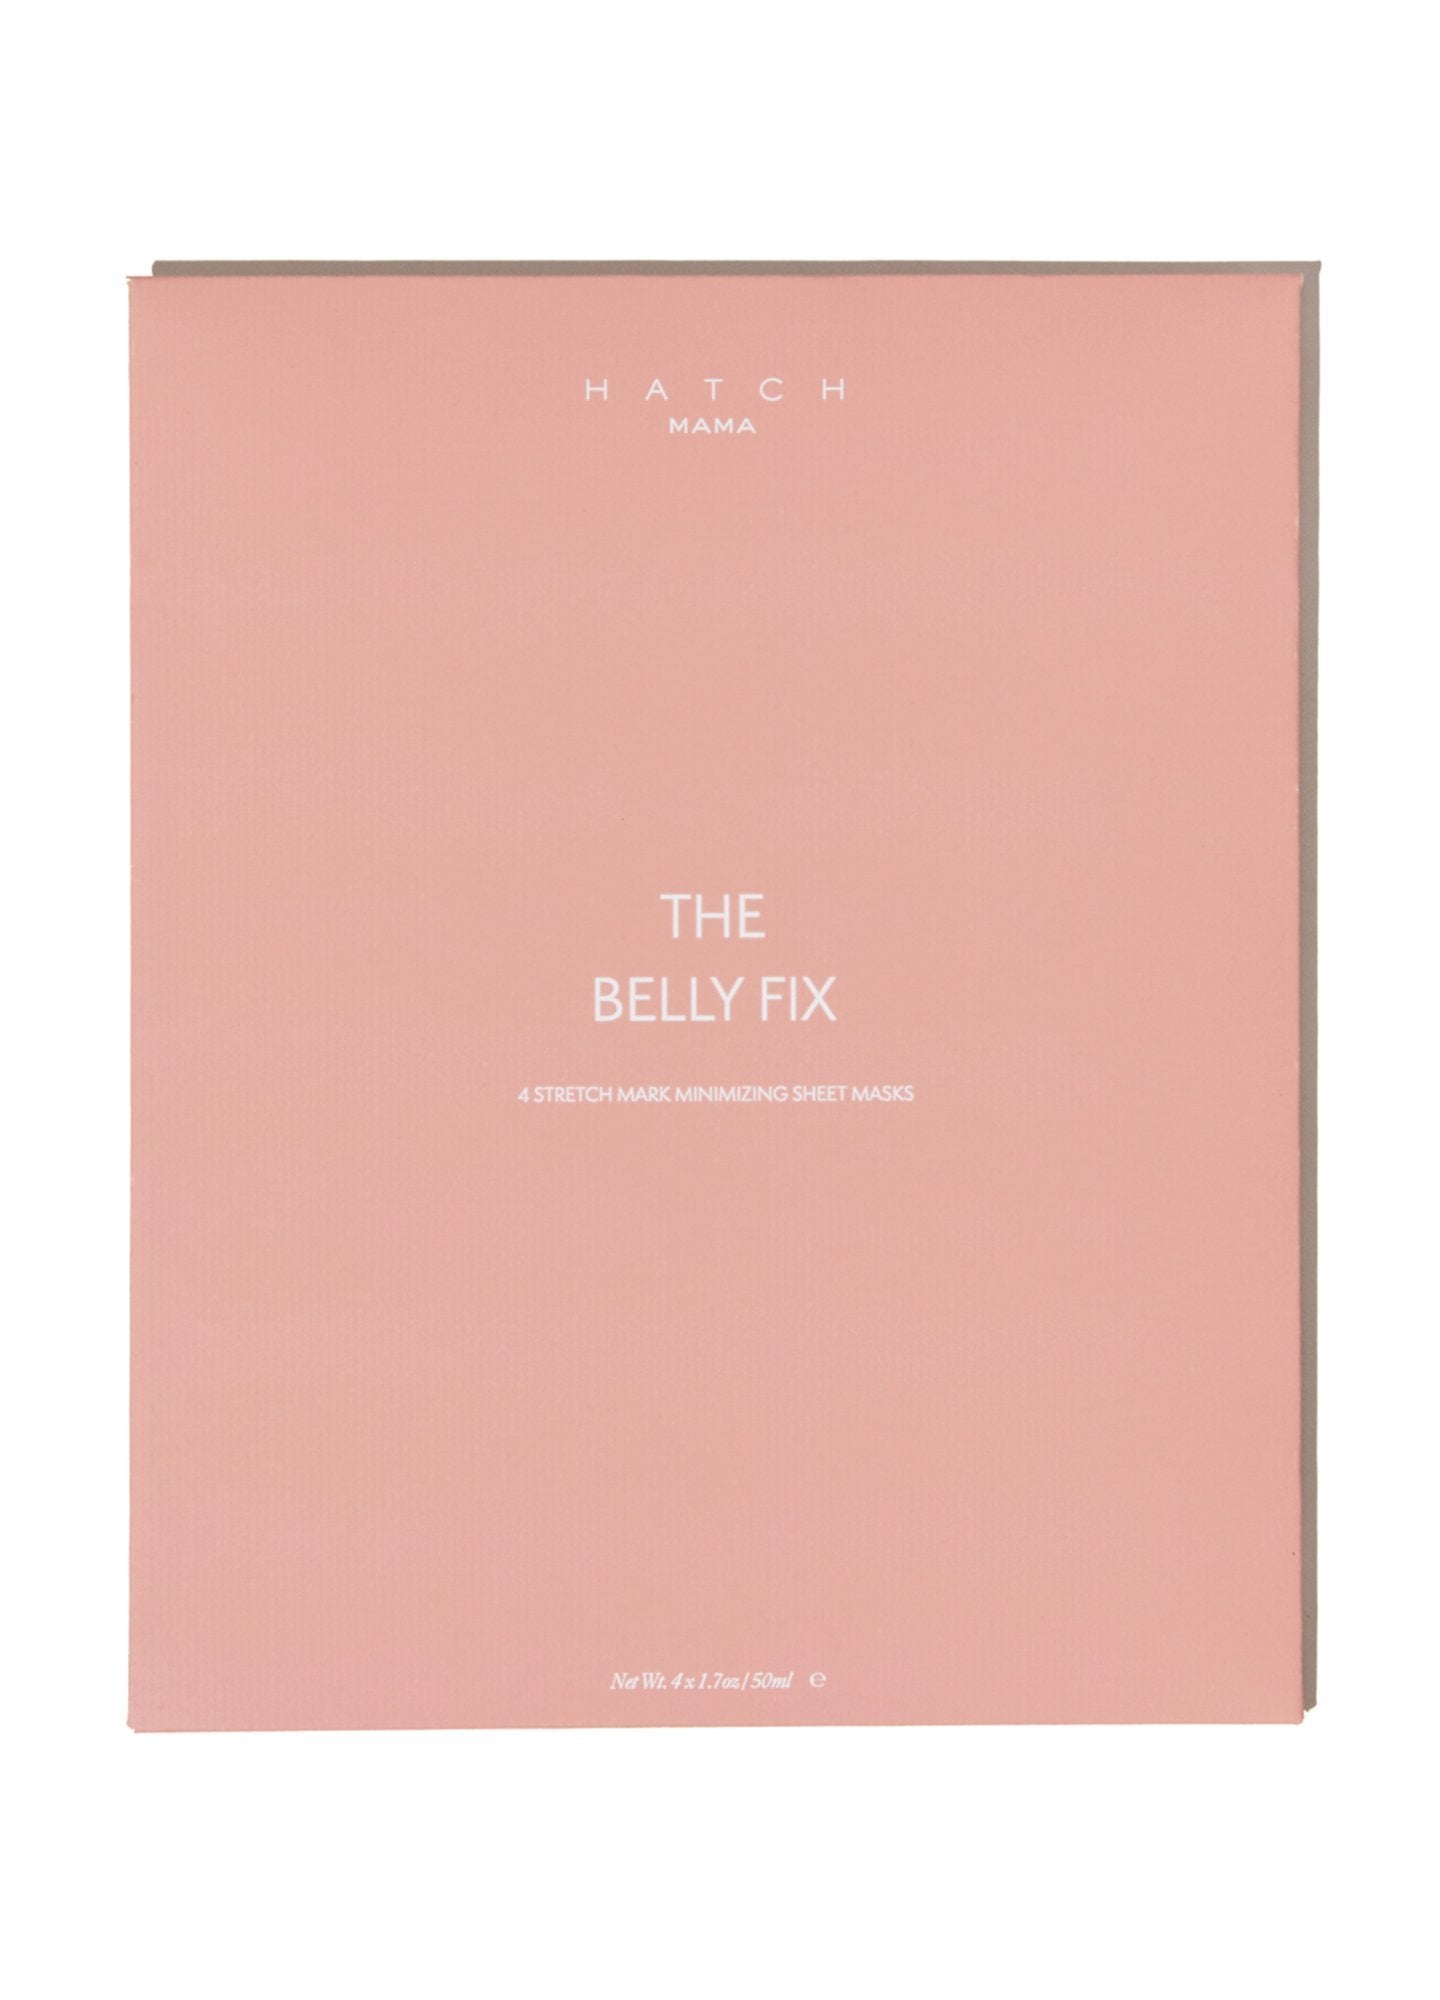 The Belly Fix